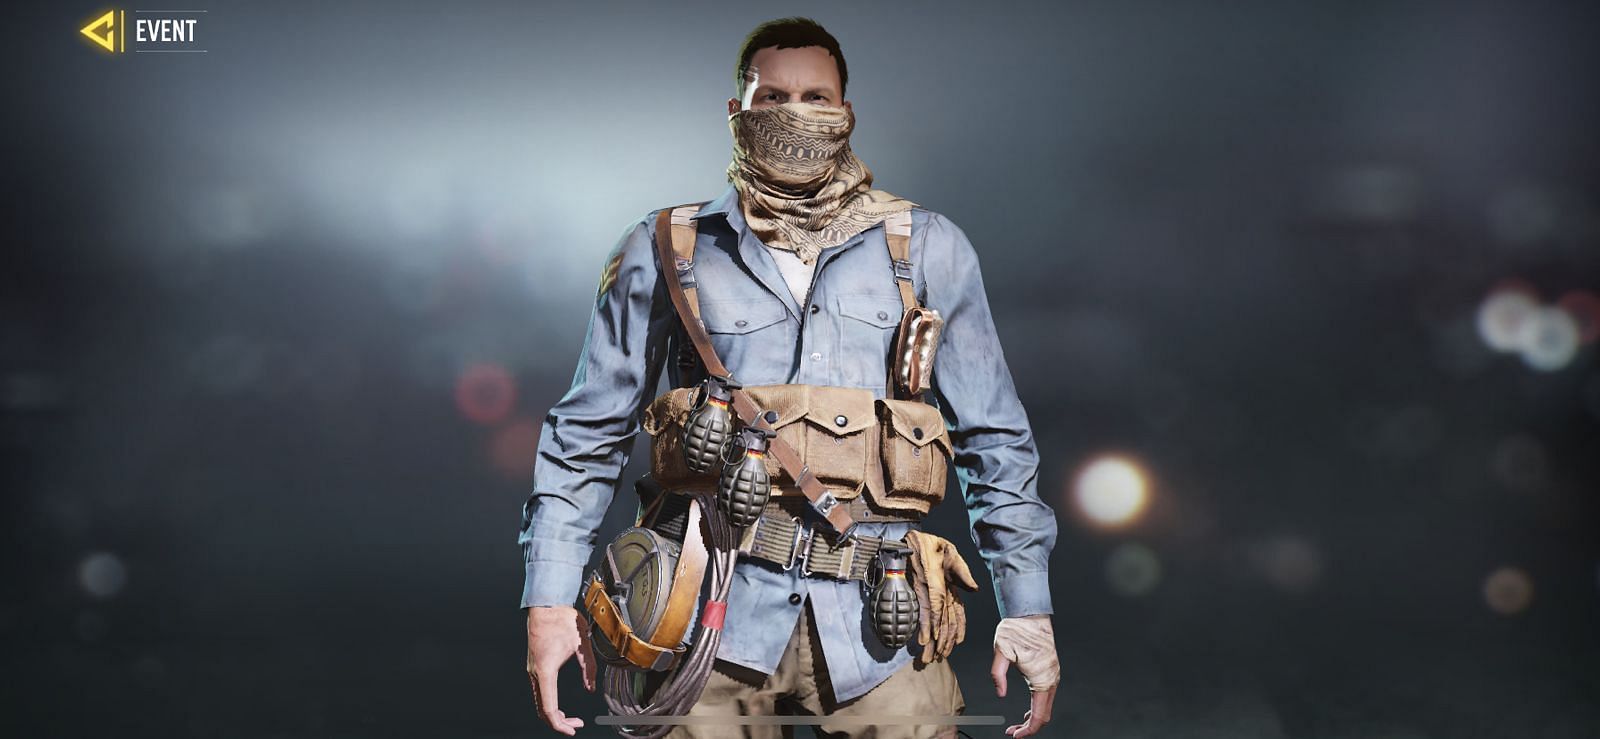 Call of Duty Mobile Players will be getting free operator skin Riggs